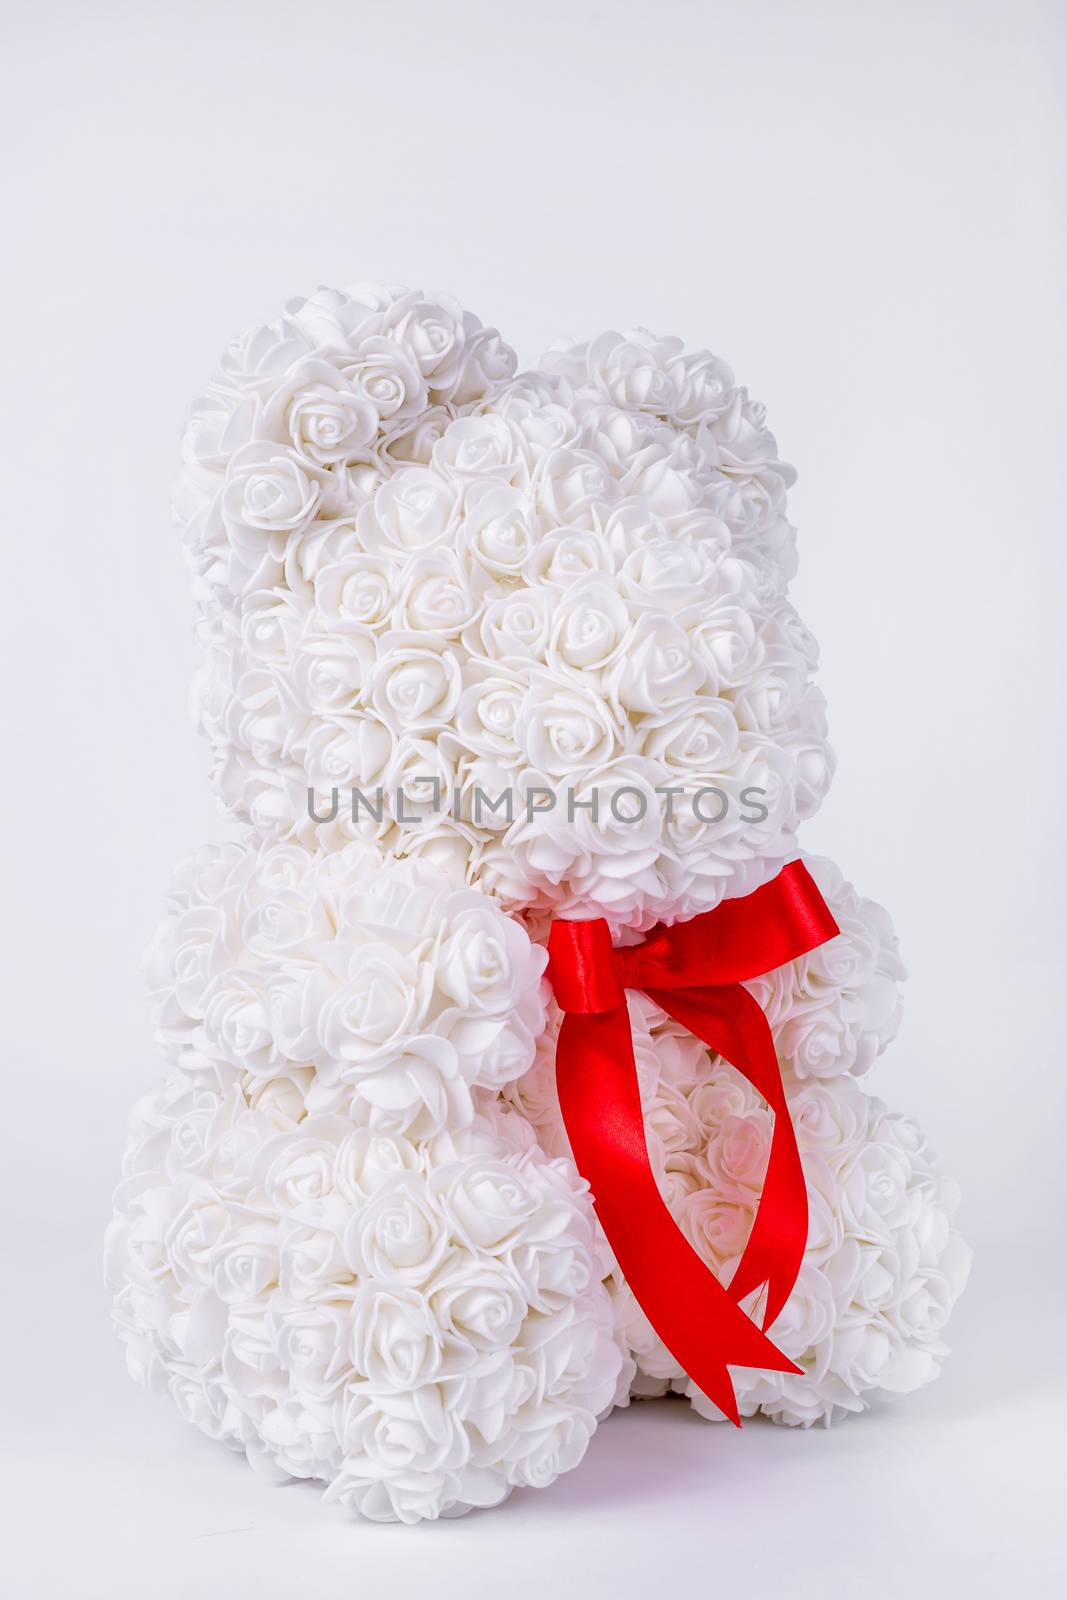 White teddy bear toy of foamirane roses. Red stripe on teddy neck. Stock photo isolated on white background. Gift on holiday for women. by alexsdriver